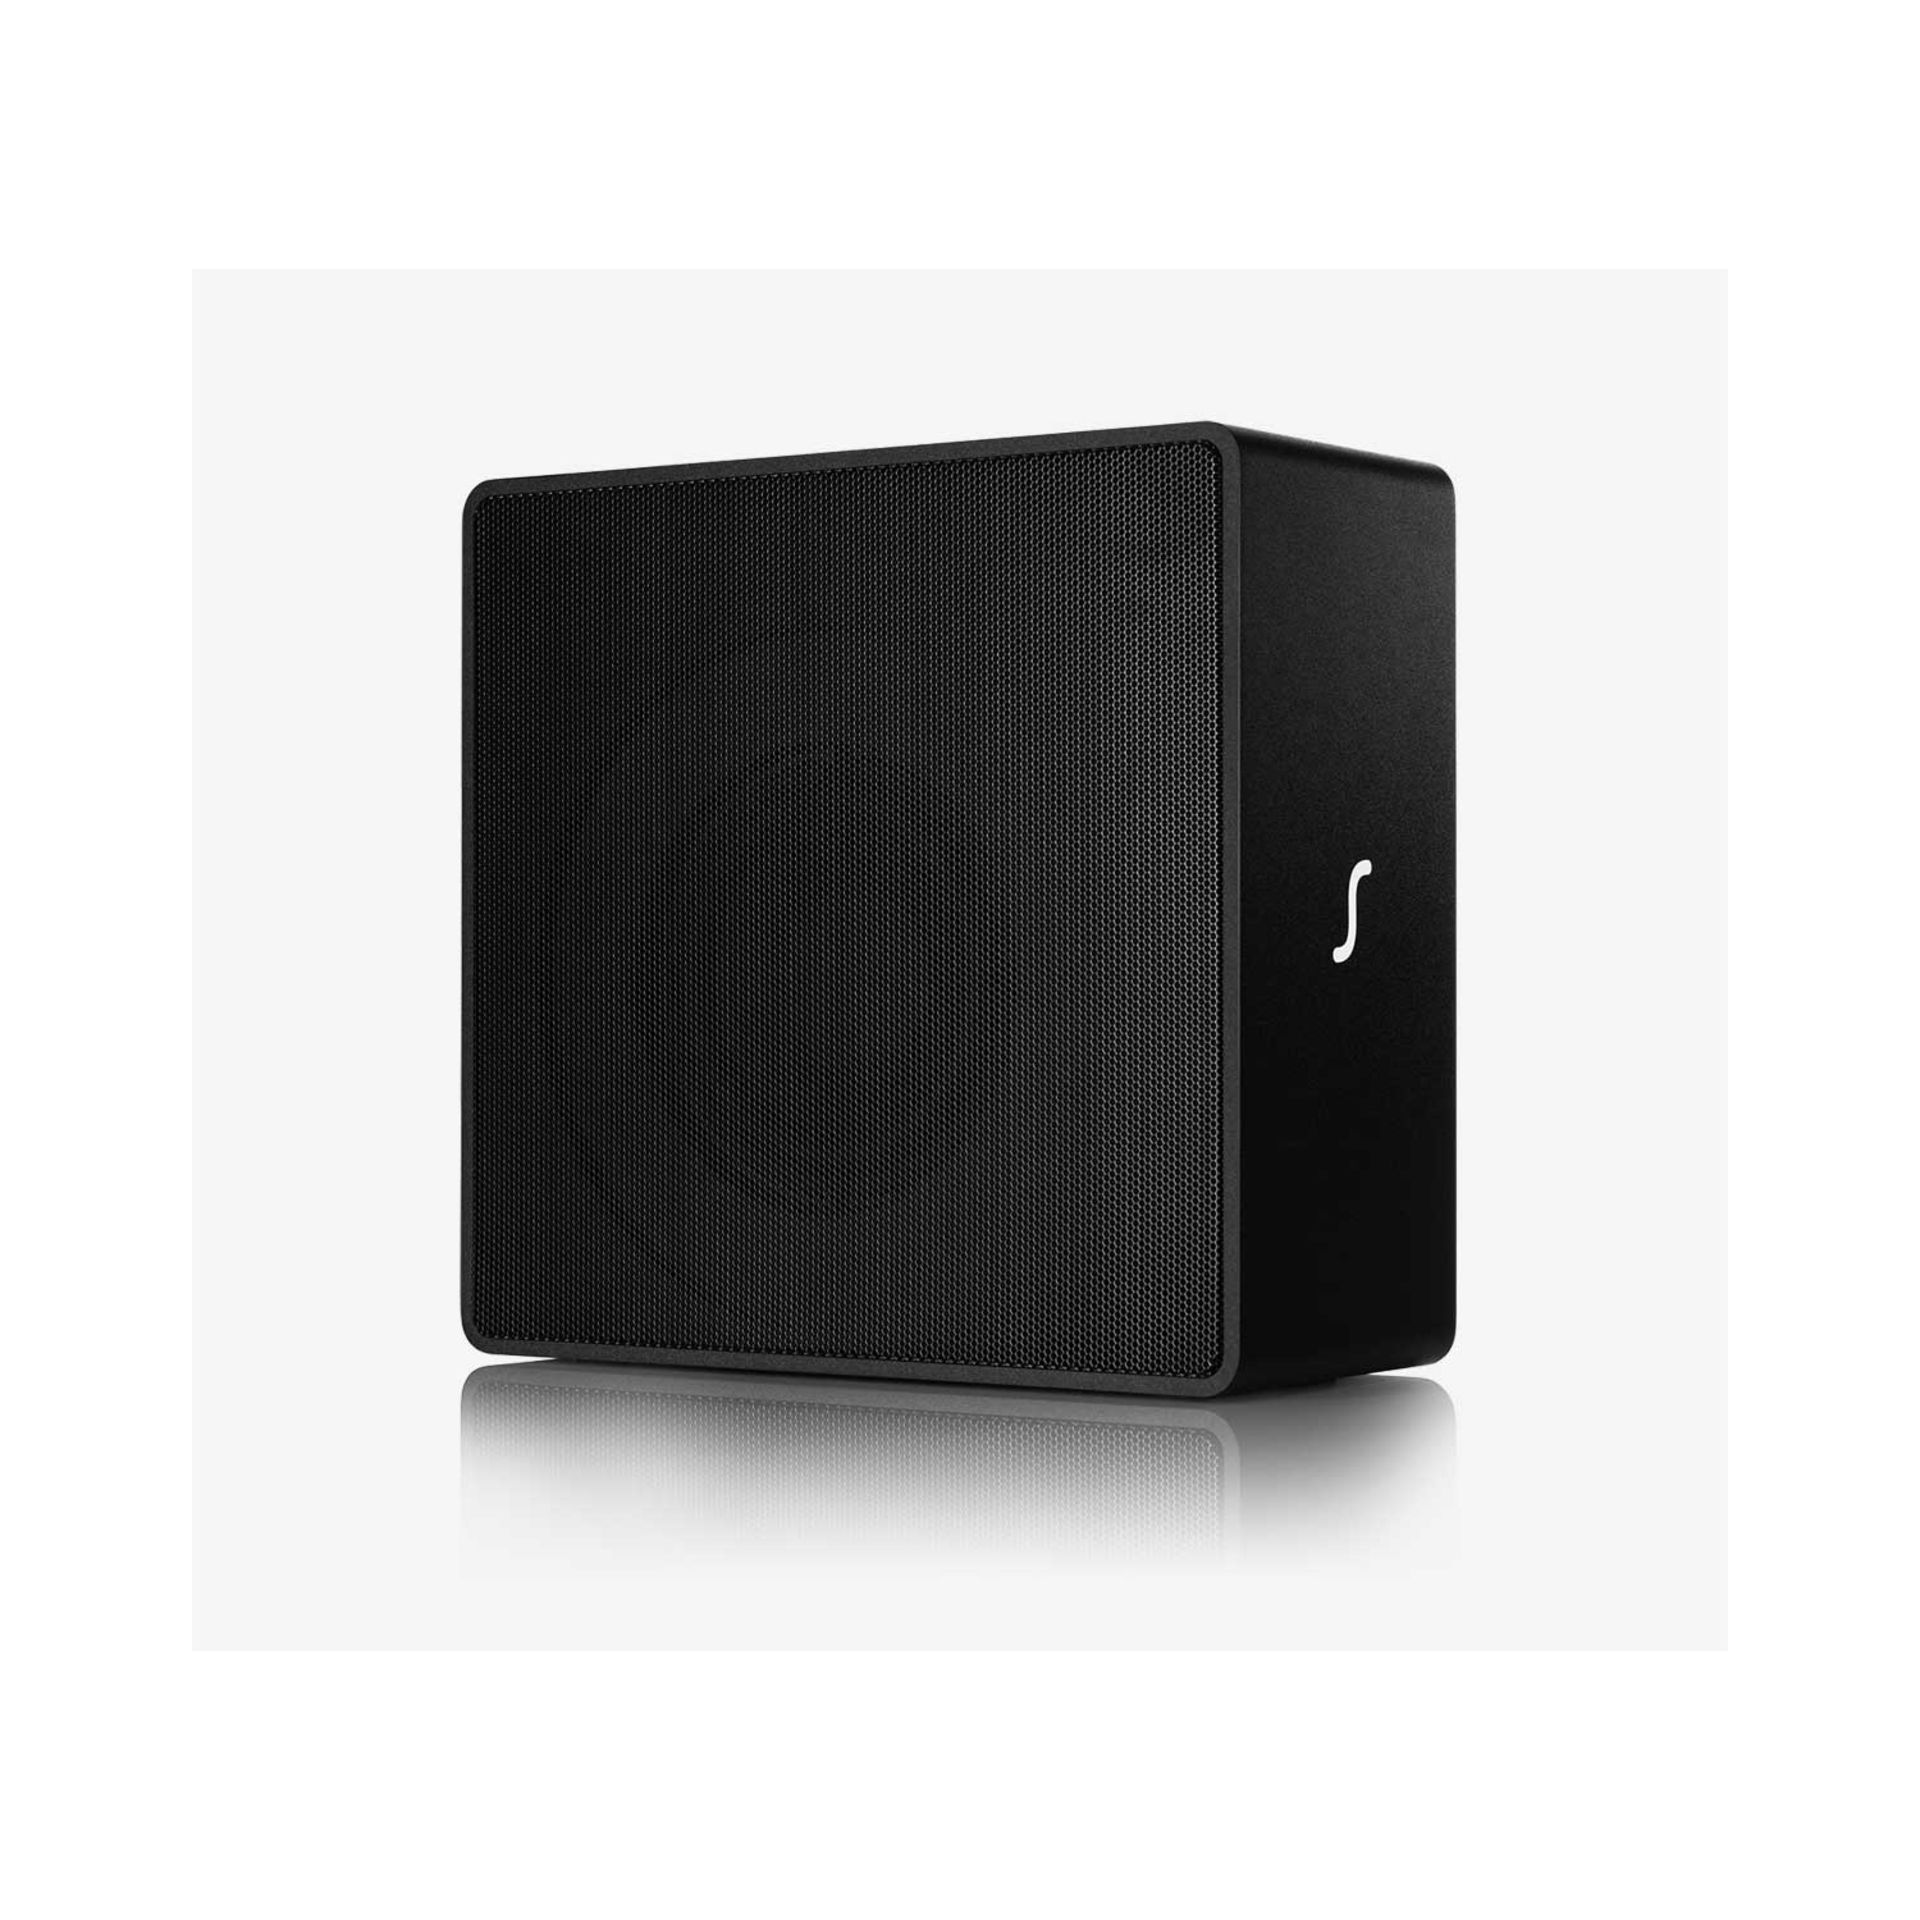 band new orbitsound bluetooth subwoofer rrp £299 - Image 2 of 3